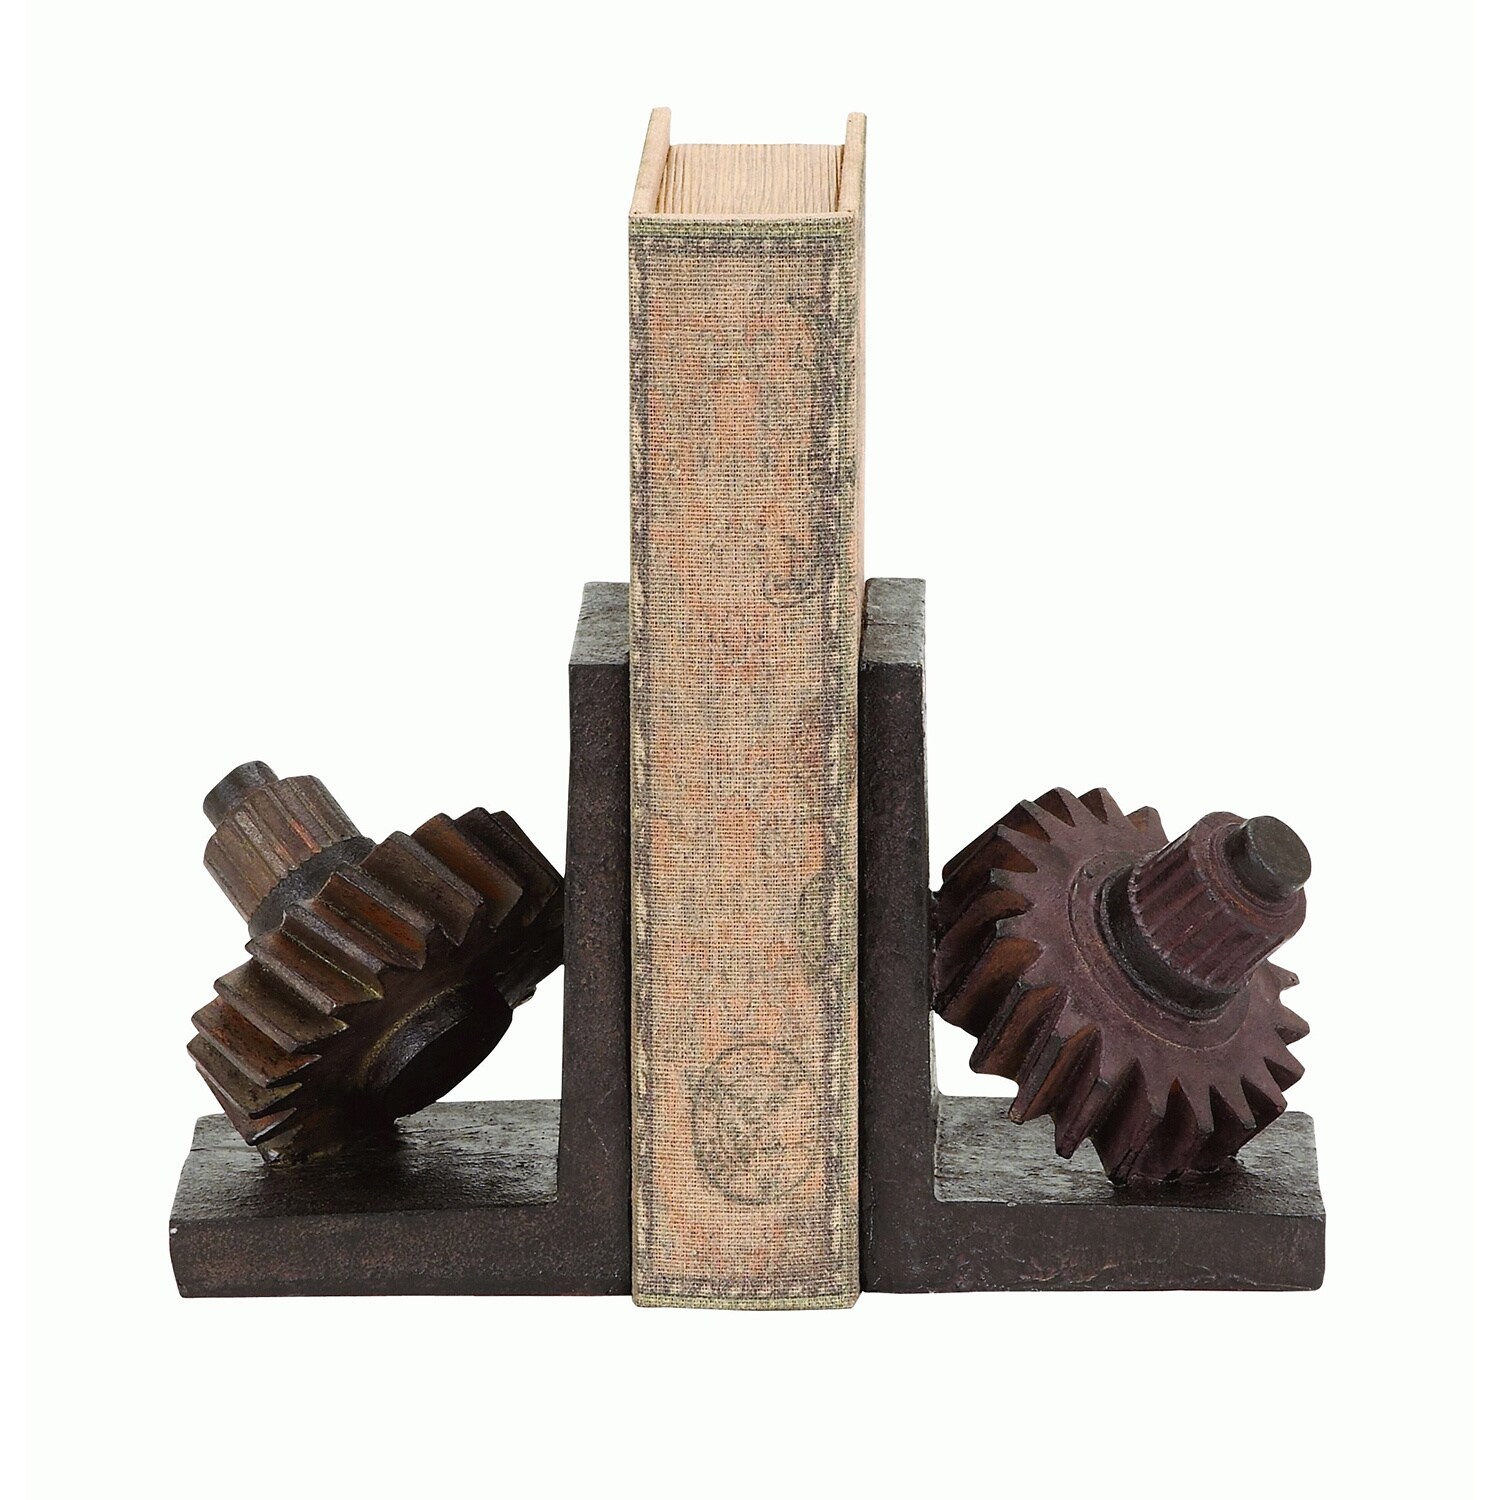 Rusted Gear Themed Book End Set